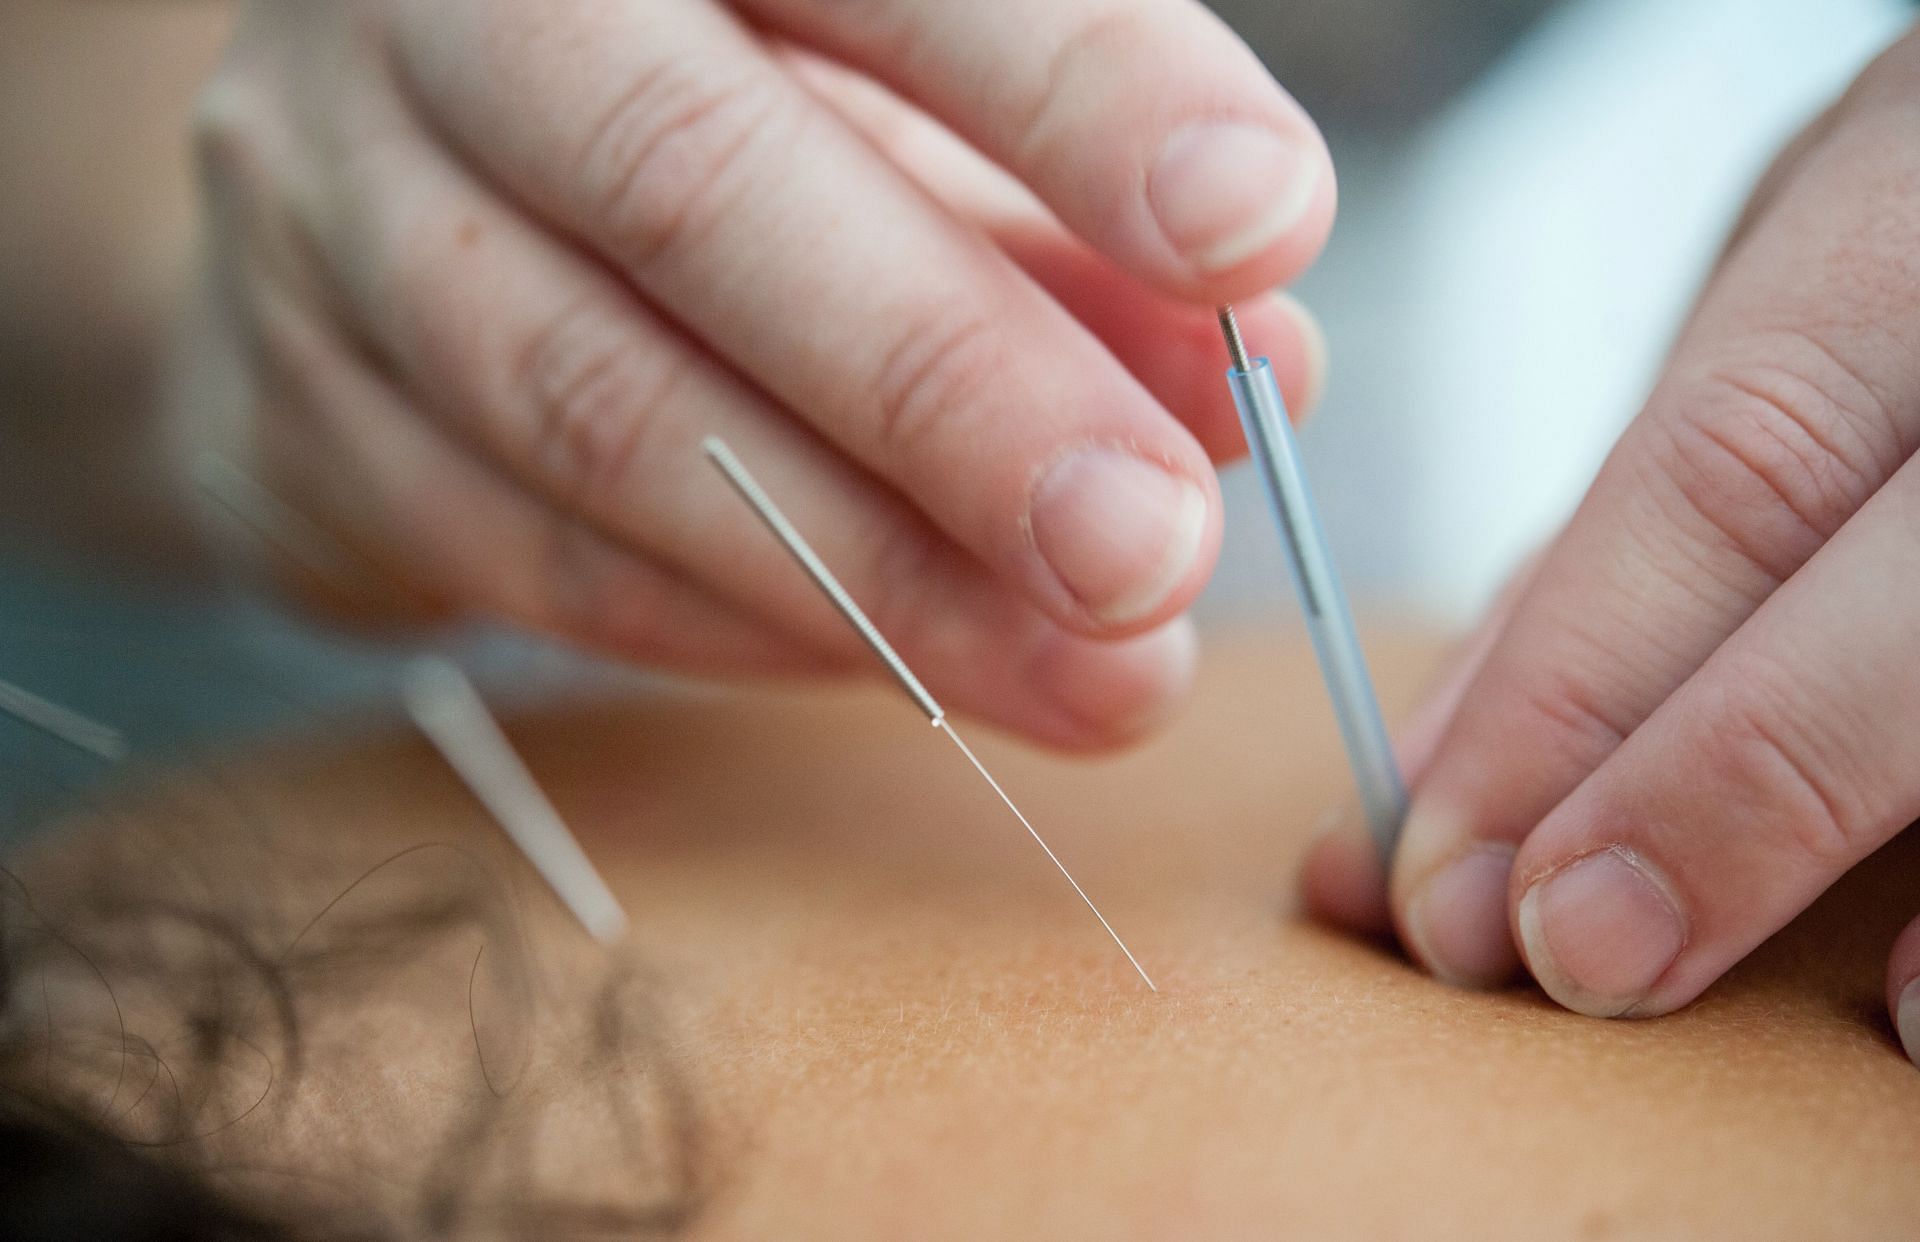  Acupuncture is a traditional Chinese medicine (TCM) therapy that involves the insertion of thin, sterile needles into specific points on the body called acupuncture points (Photo by Katherine Hanlon on Unsplash)